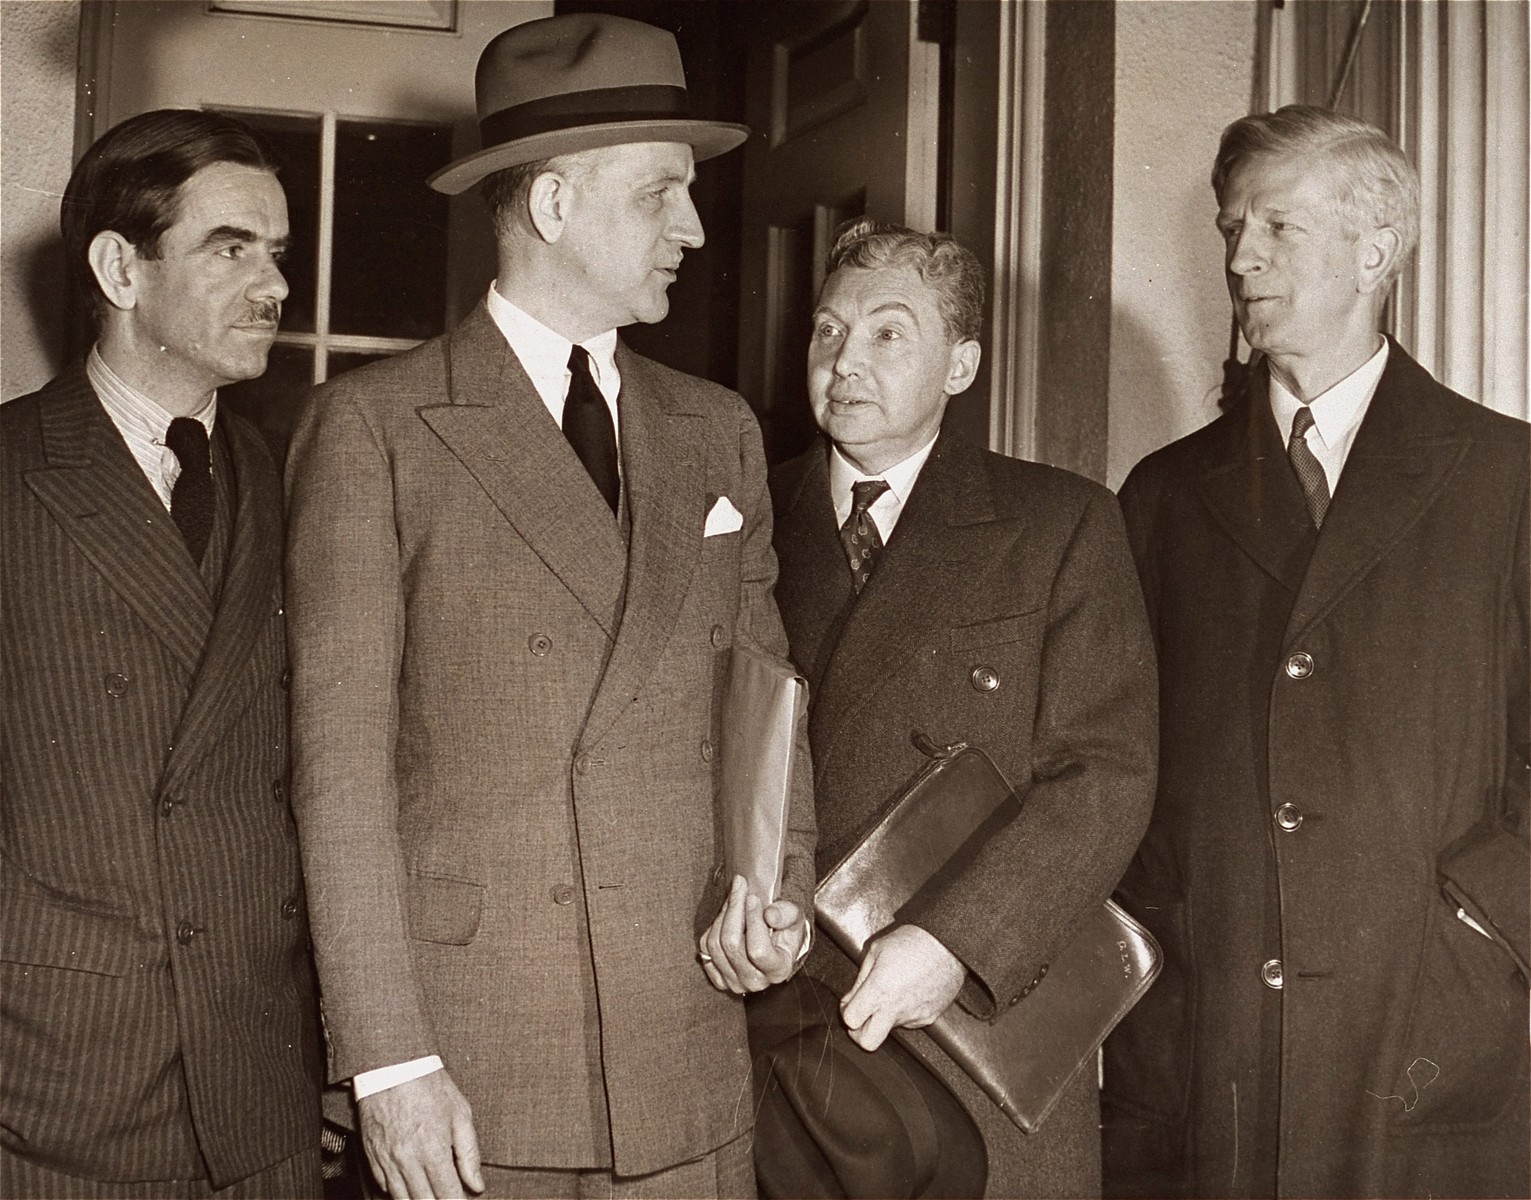 Members of the President's Advisory Committee on Political Refugees pose with Under Secretary of State Sumner Welles after their meeting at the White House with Roosevelt.

Pictured from left to right are: Hamilton F. Armstrong, Sumner Welles, committee secretary George L. Warren, and committee chairman, James McDonald.

Original  AP caption reads: "With tense relations existing between nations over handling of minorities, the National Advisory Committee on Refugees reported to President Roosevelt in Washinton, D.C. Nov. 16 at the White House.  From the left: Committeeman Hamilton F. Armstrong; Under Secretary of State Sumner Welles who sat in on the meeting; Secretary of Committee George L. Warren and Chairman James Mac Donald [sic]."